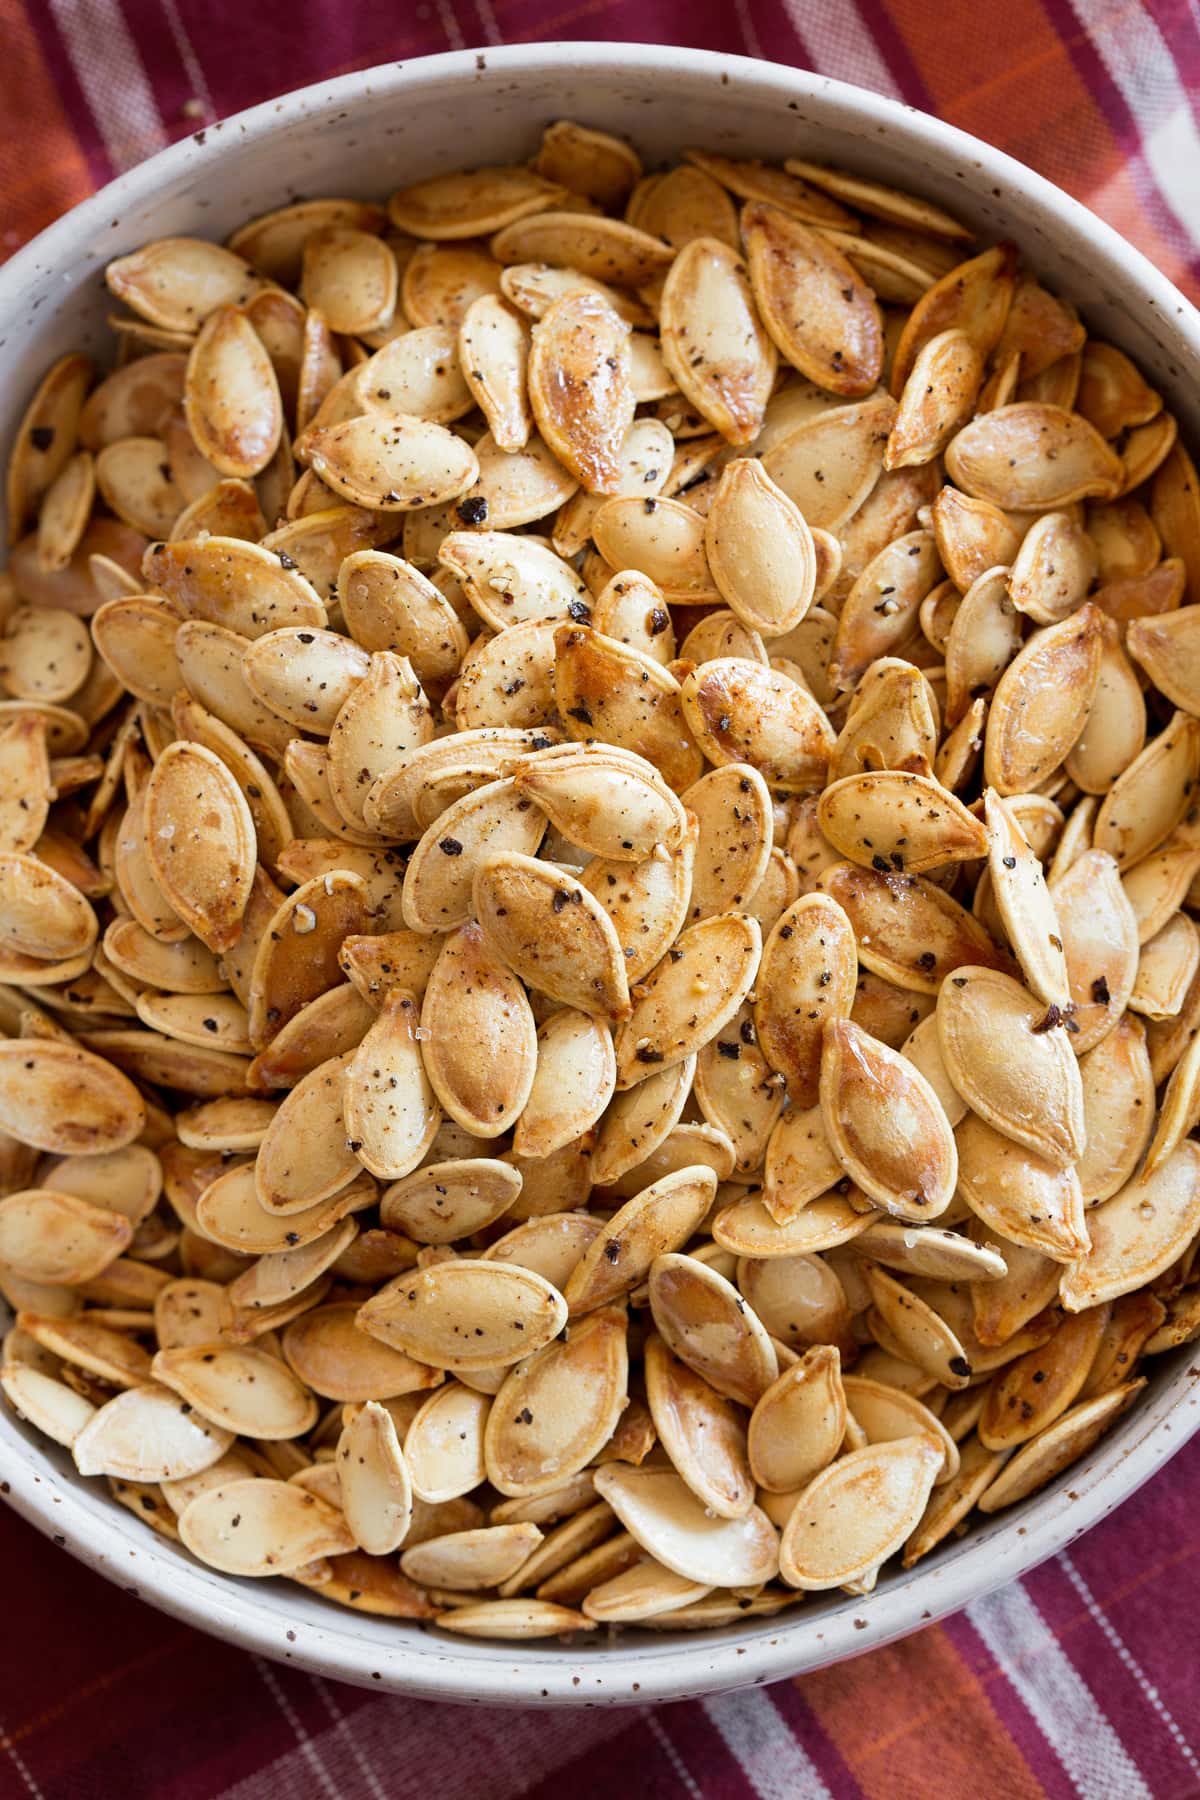 Image of roasted pumpkin seeds shown close up overhead in a white bowl.